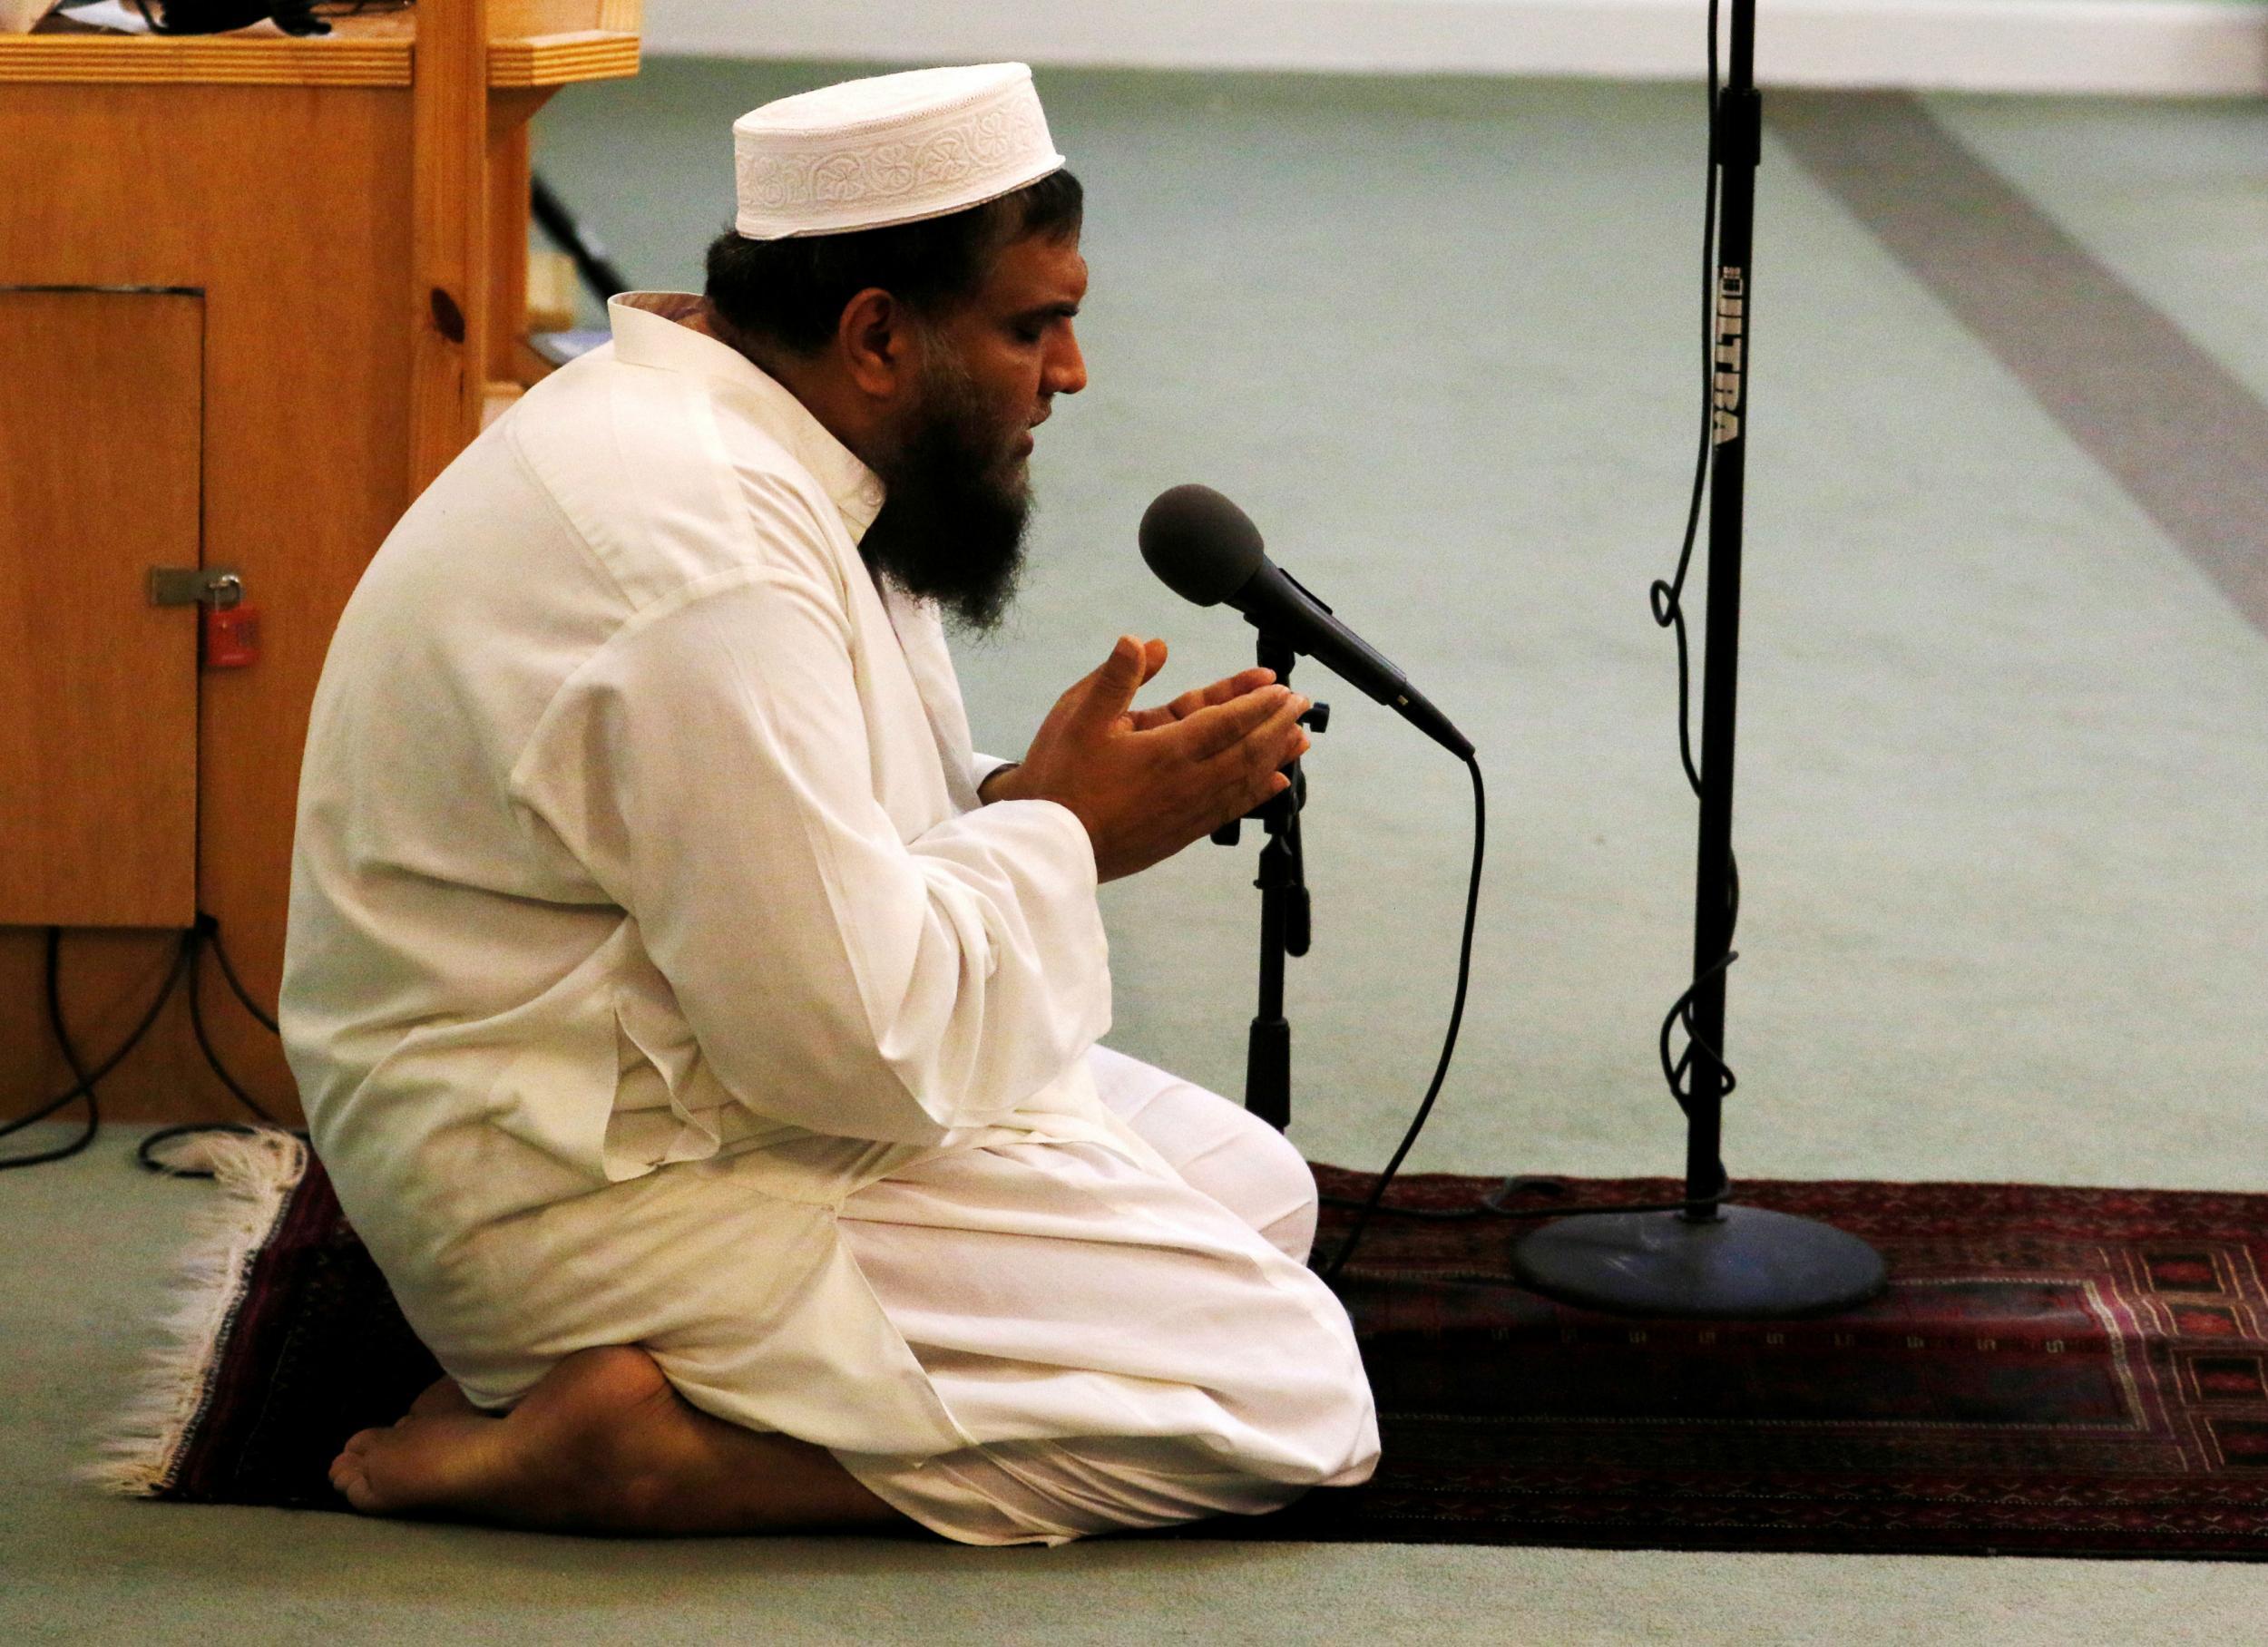 Shafiq Rehman, the imam at the Islamic Centre of Fort Pierce, led prayers for those who died